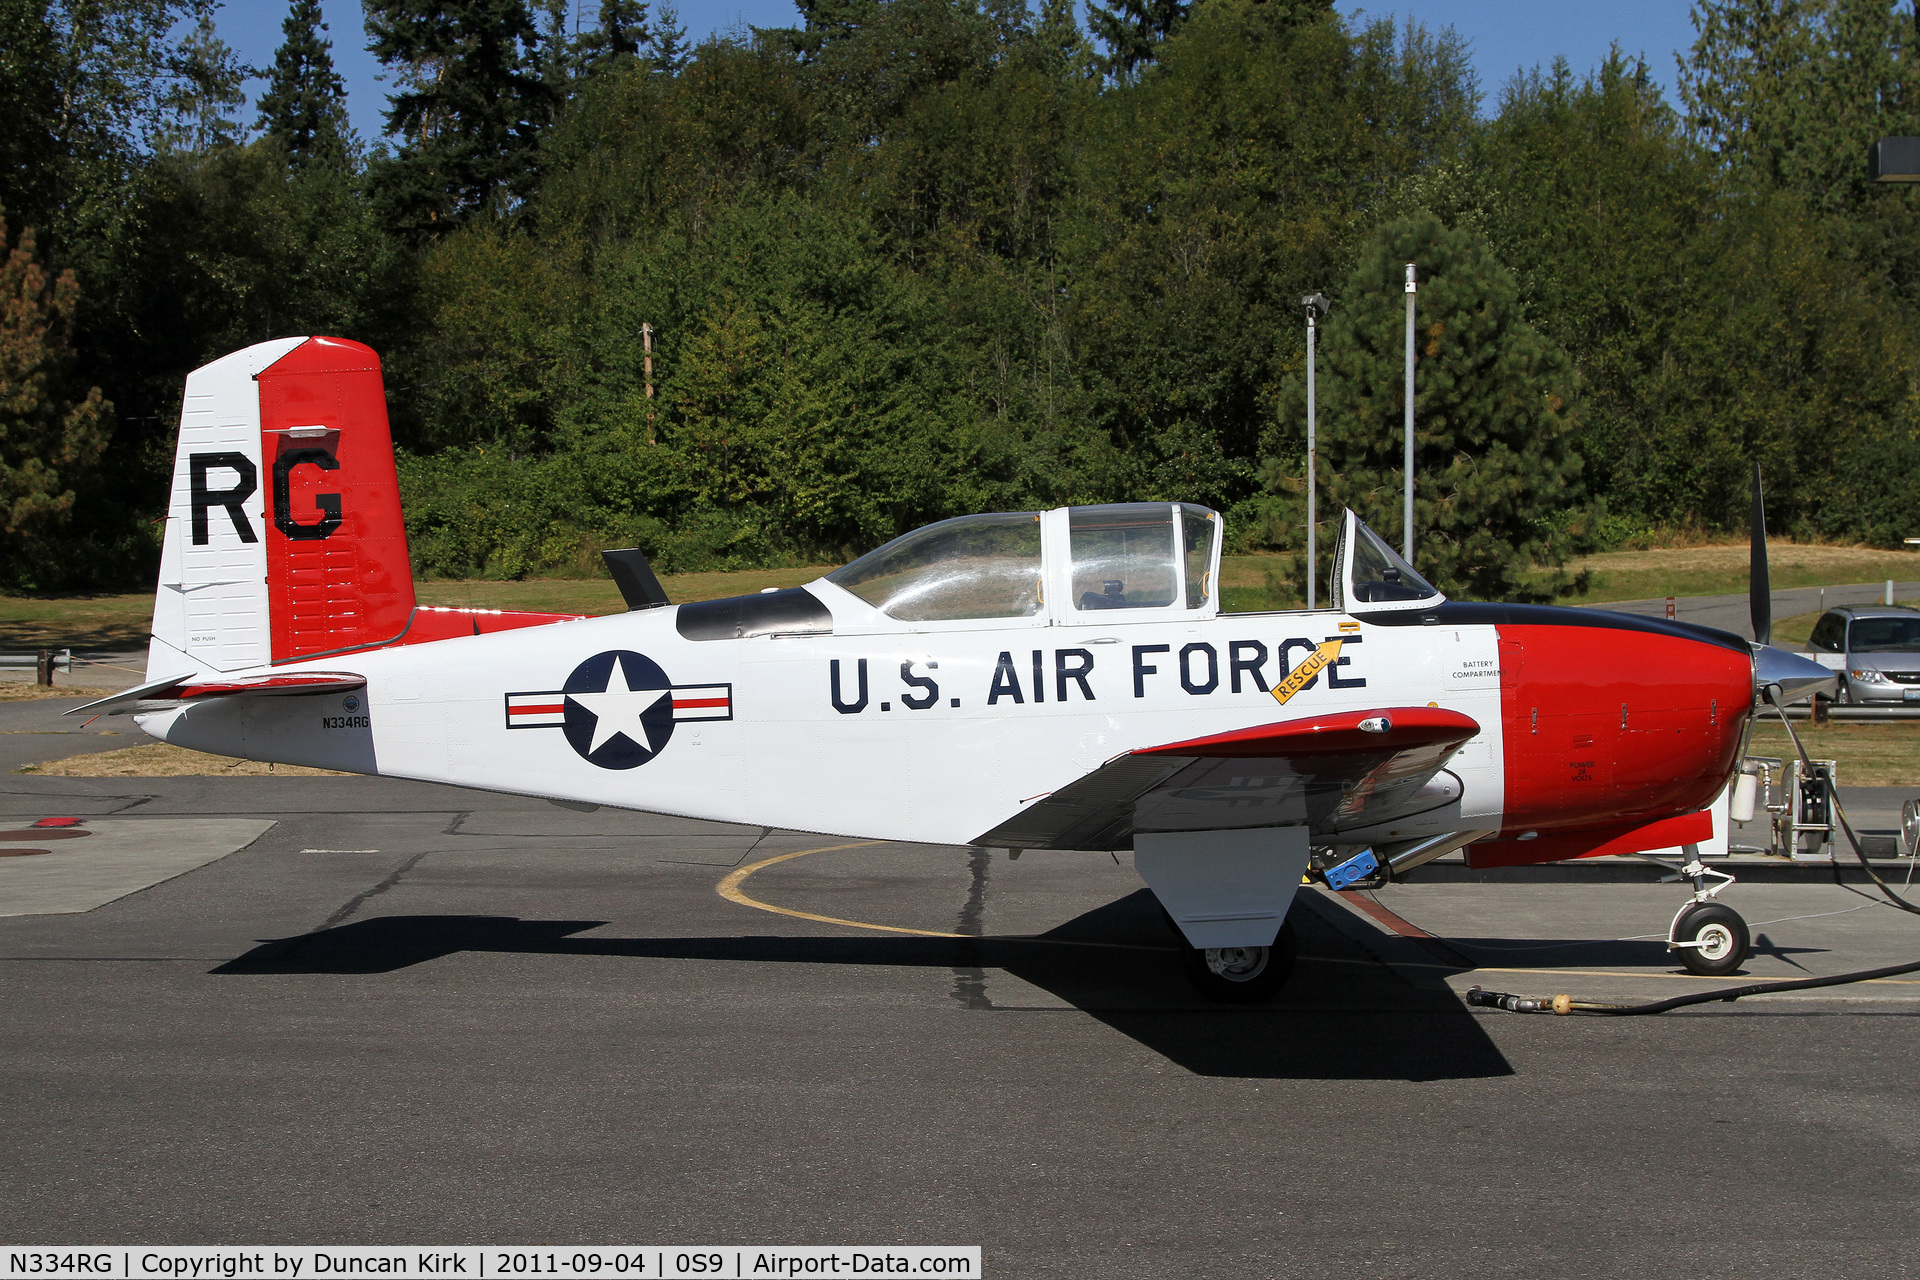 N334RG, 1954 Beech T-34A (A45) Mentor Mentor C/N G-93, A recent arrival to the Northwest from Arkansas.